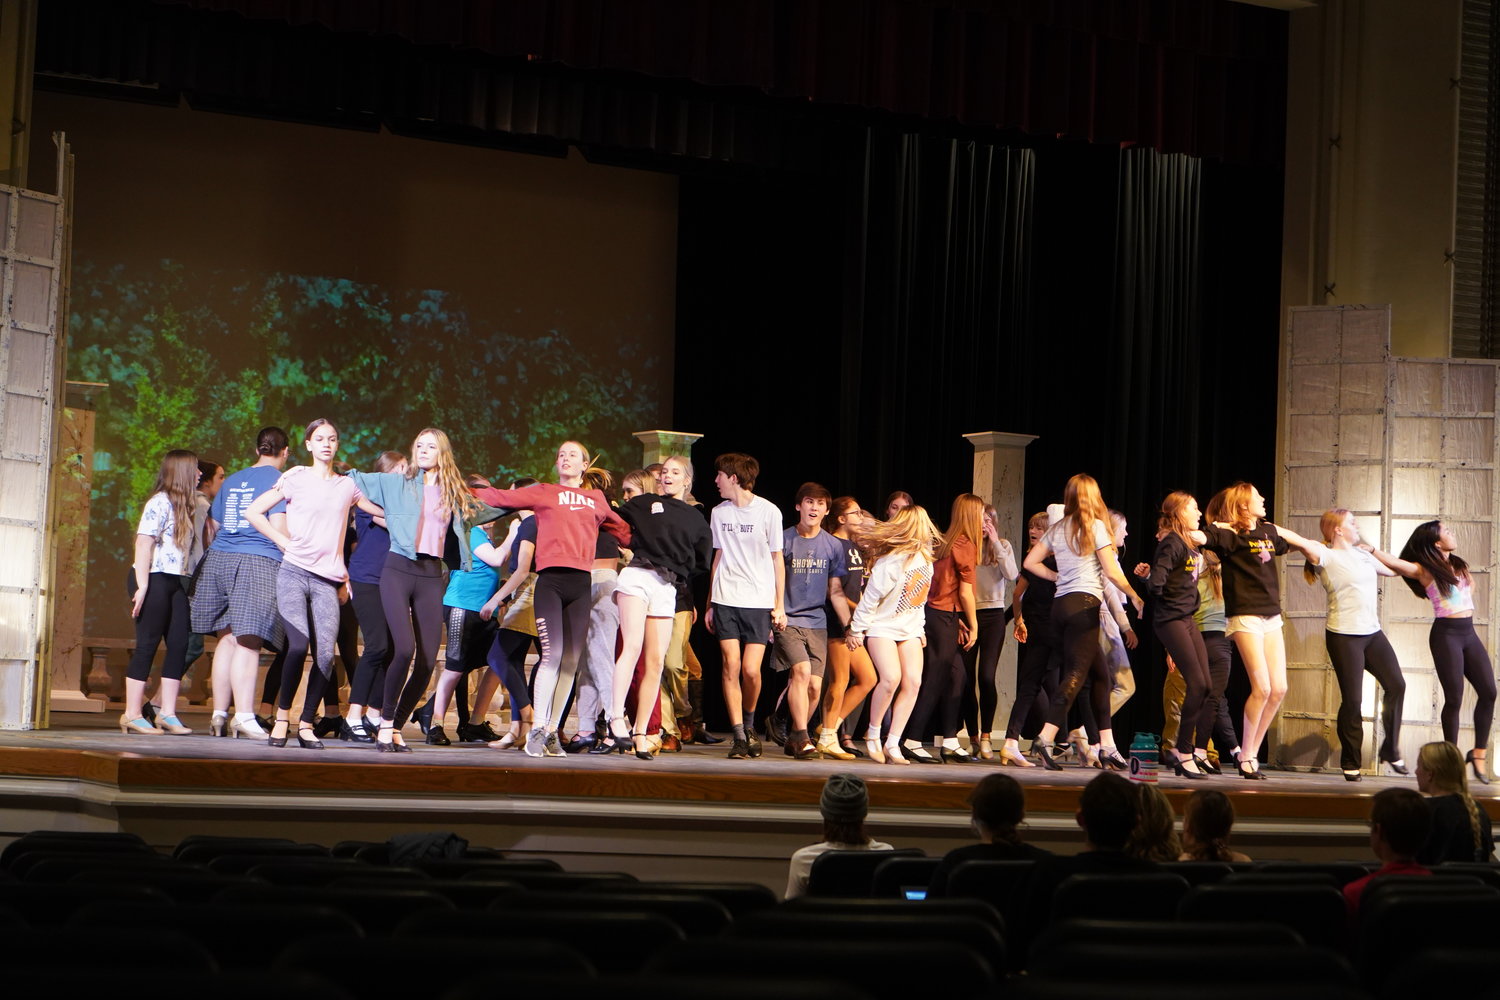 Members of the cast of Helias Catholic High School’s spring musical production of “Anastasia” rehearse a singing and dancing number on the stage of the Miller Performing Arts Center in Jefferson City on March 1.